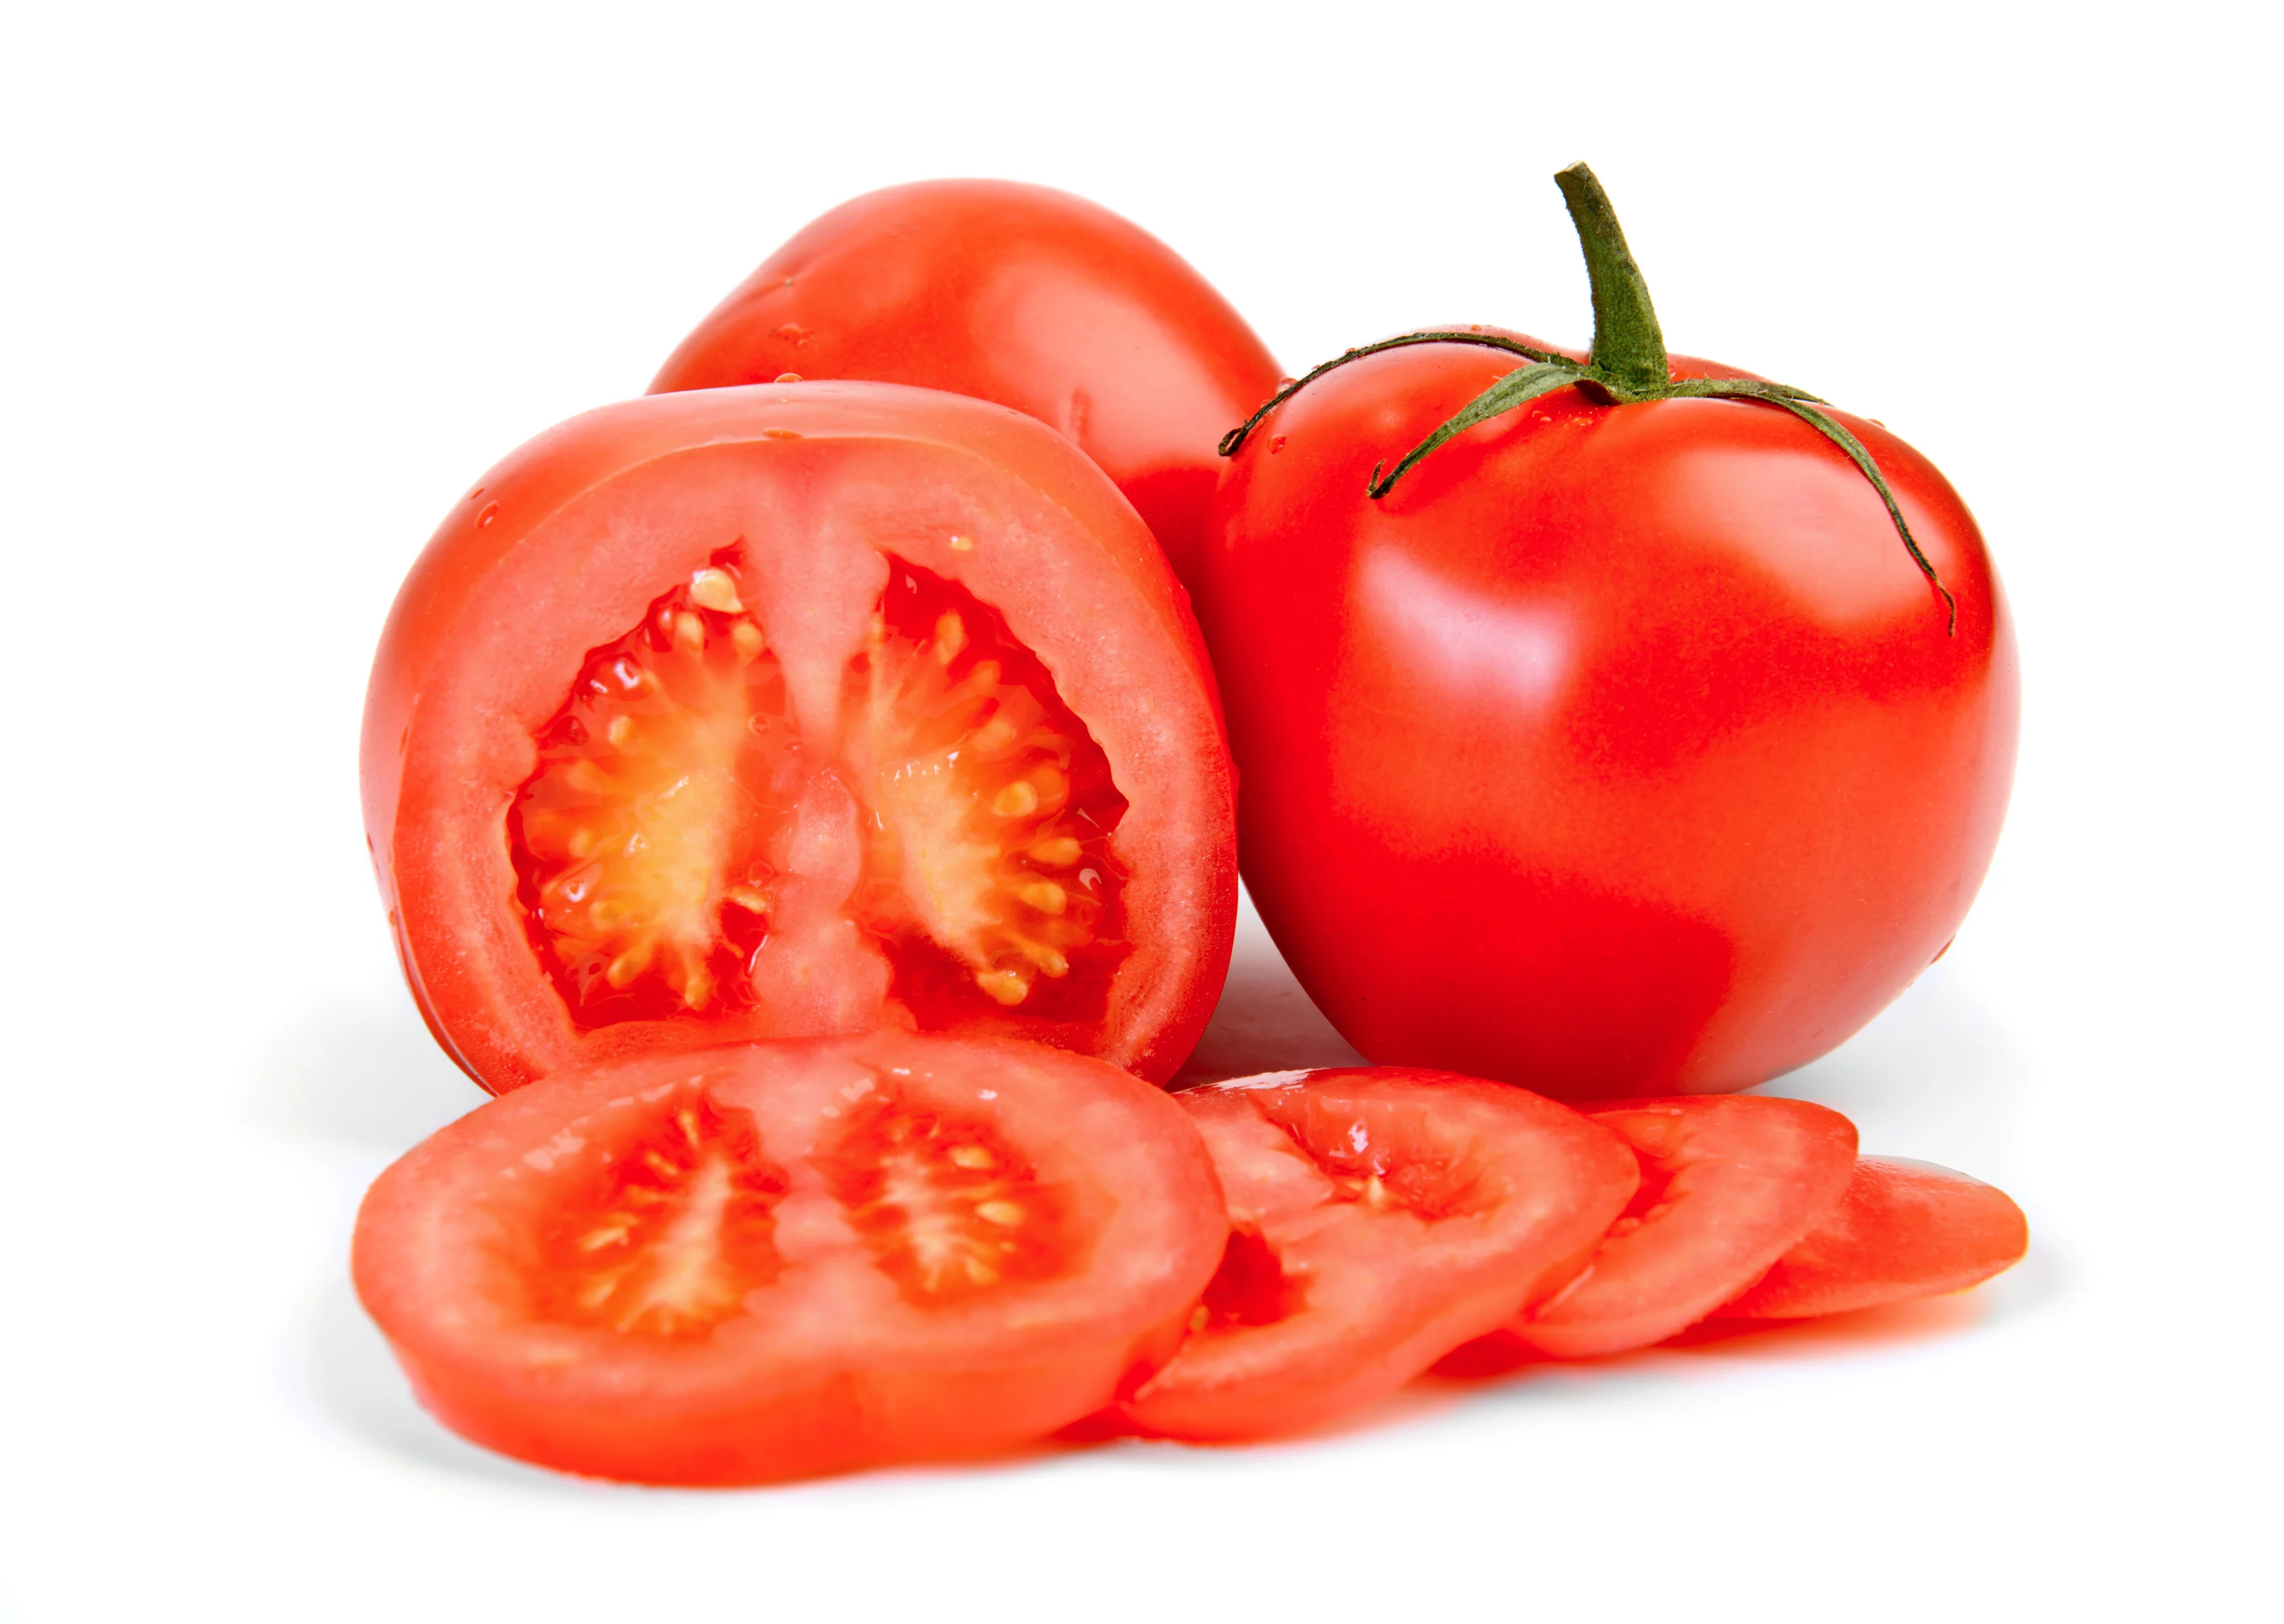 When Should You Plant Tomato Seeds